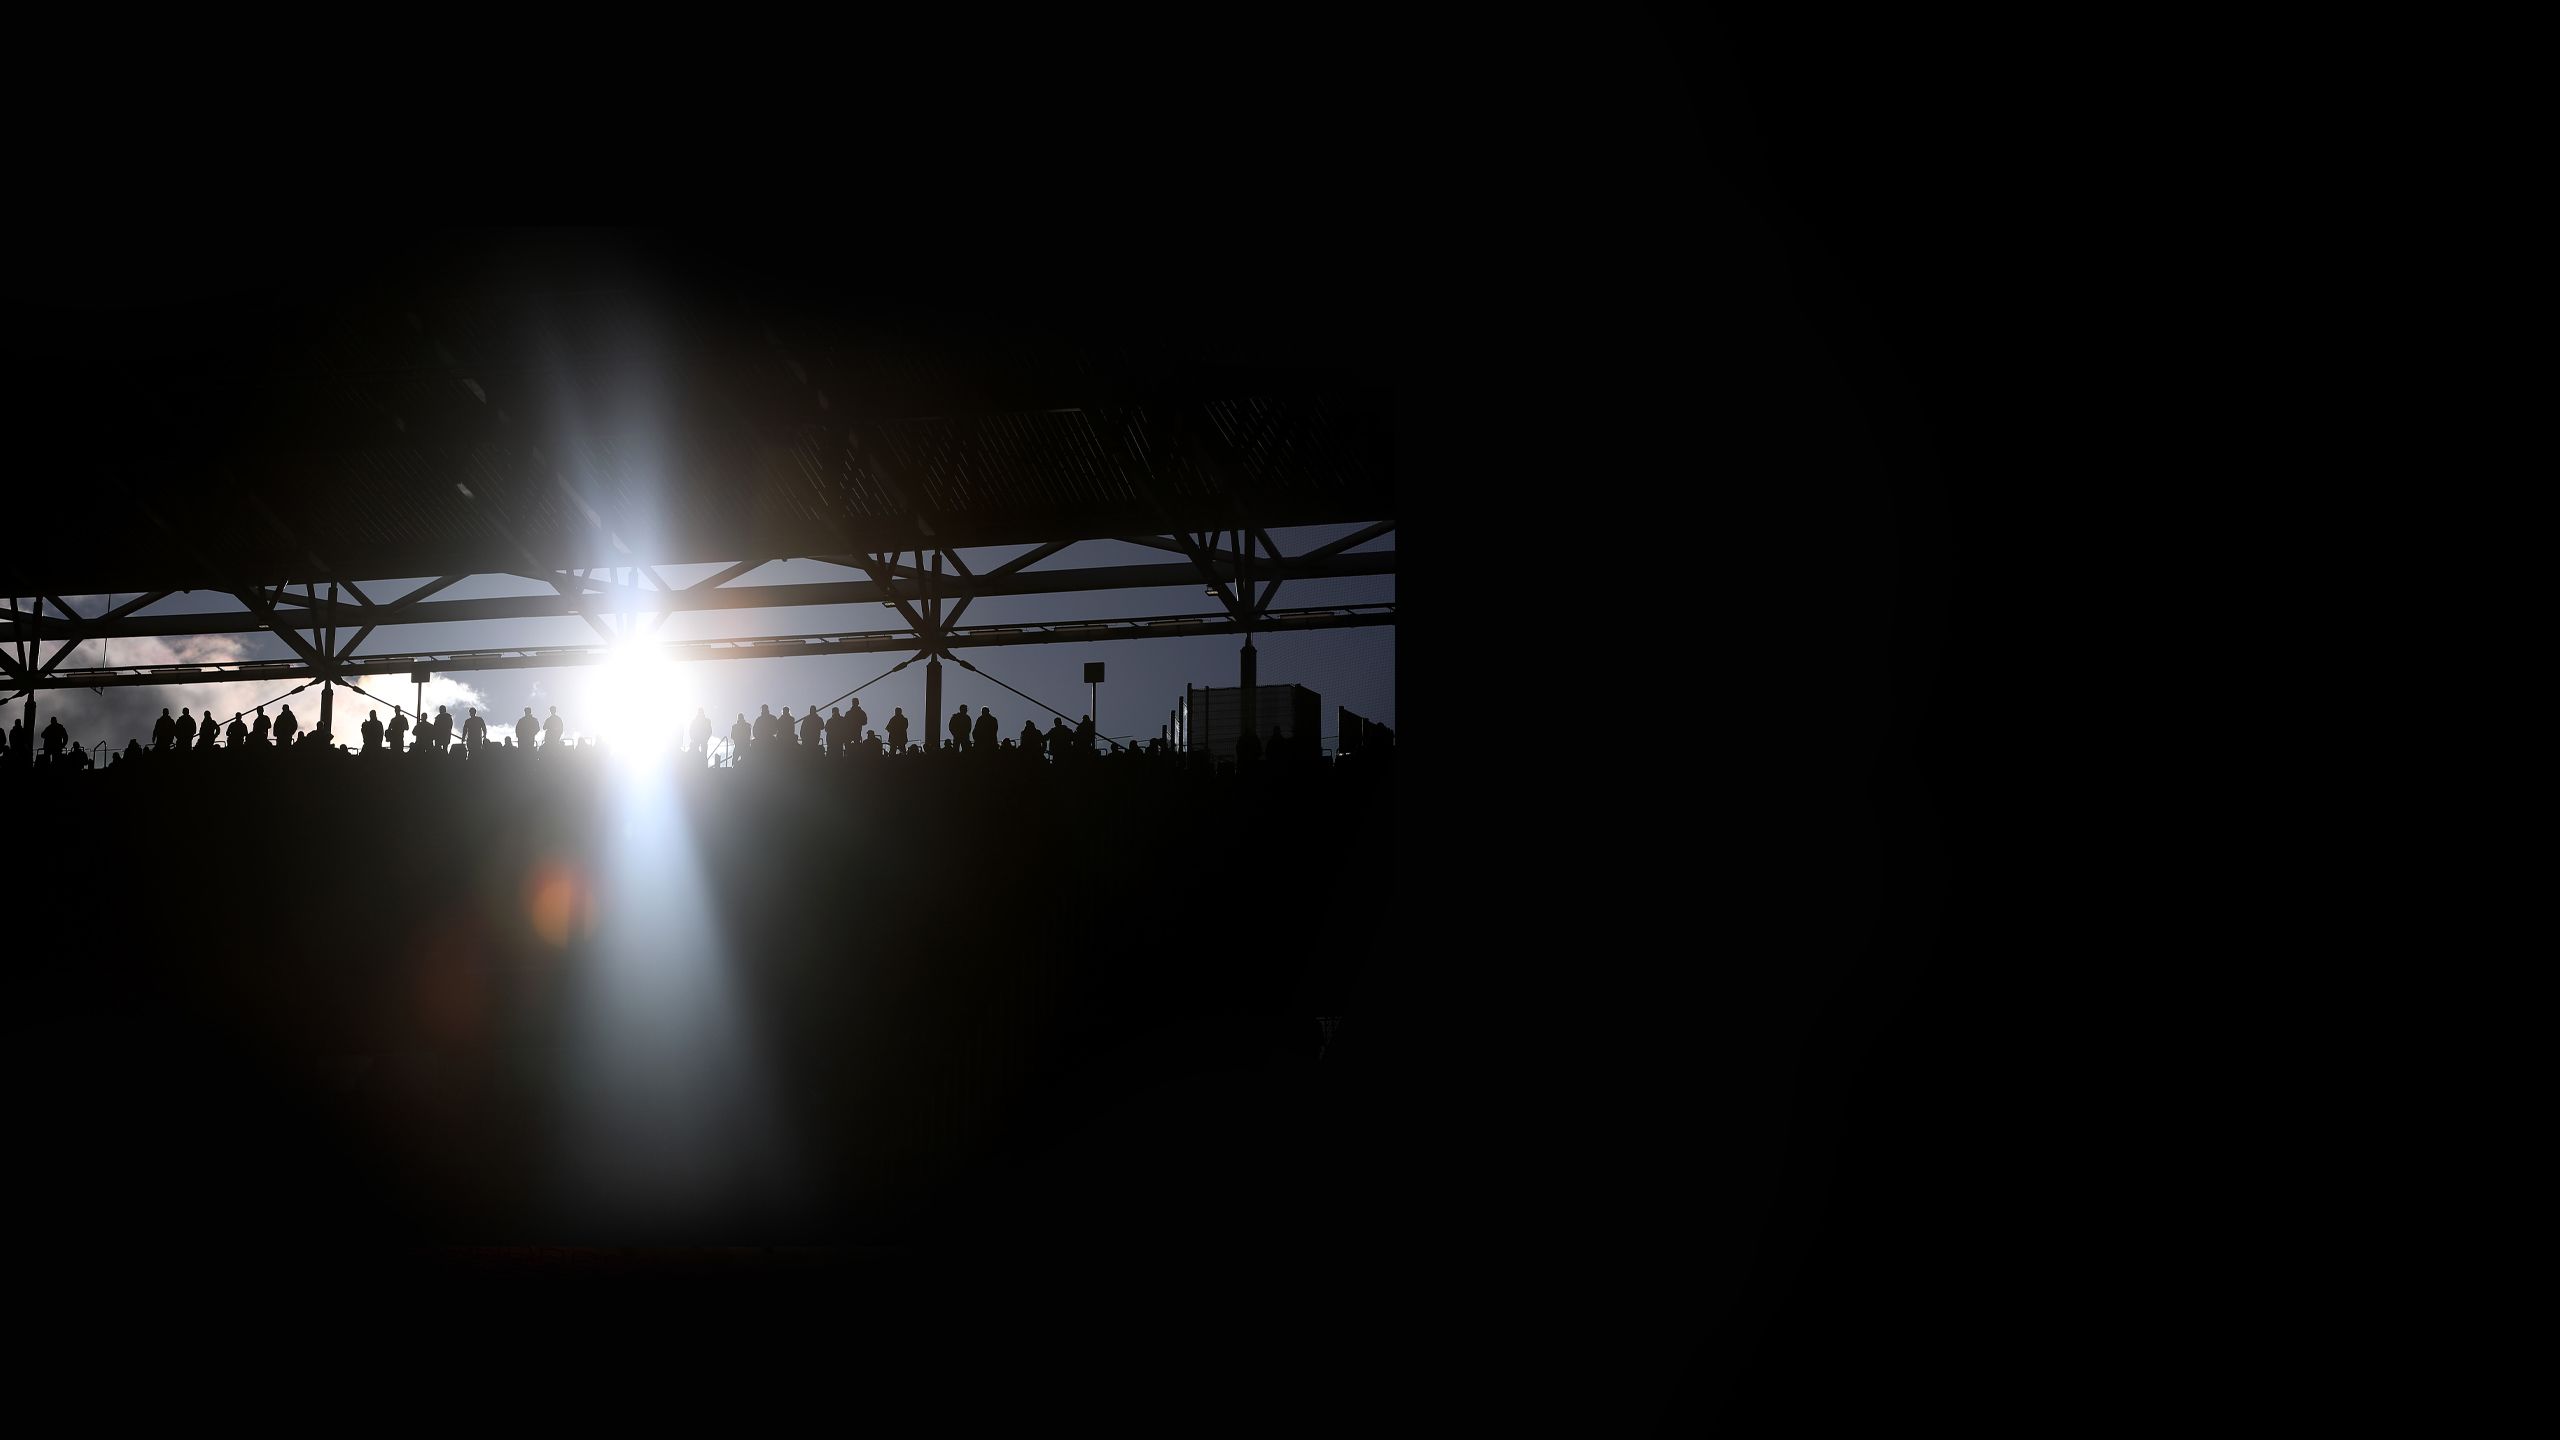 Sun shines through a gap in the stands at the stadium in Leipzig